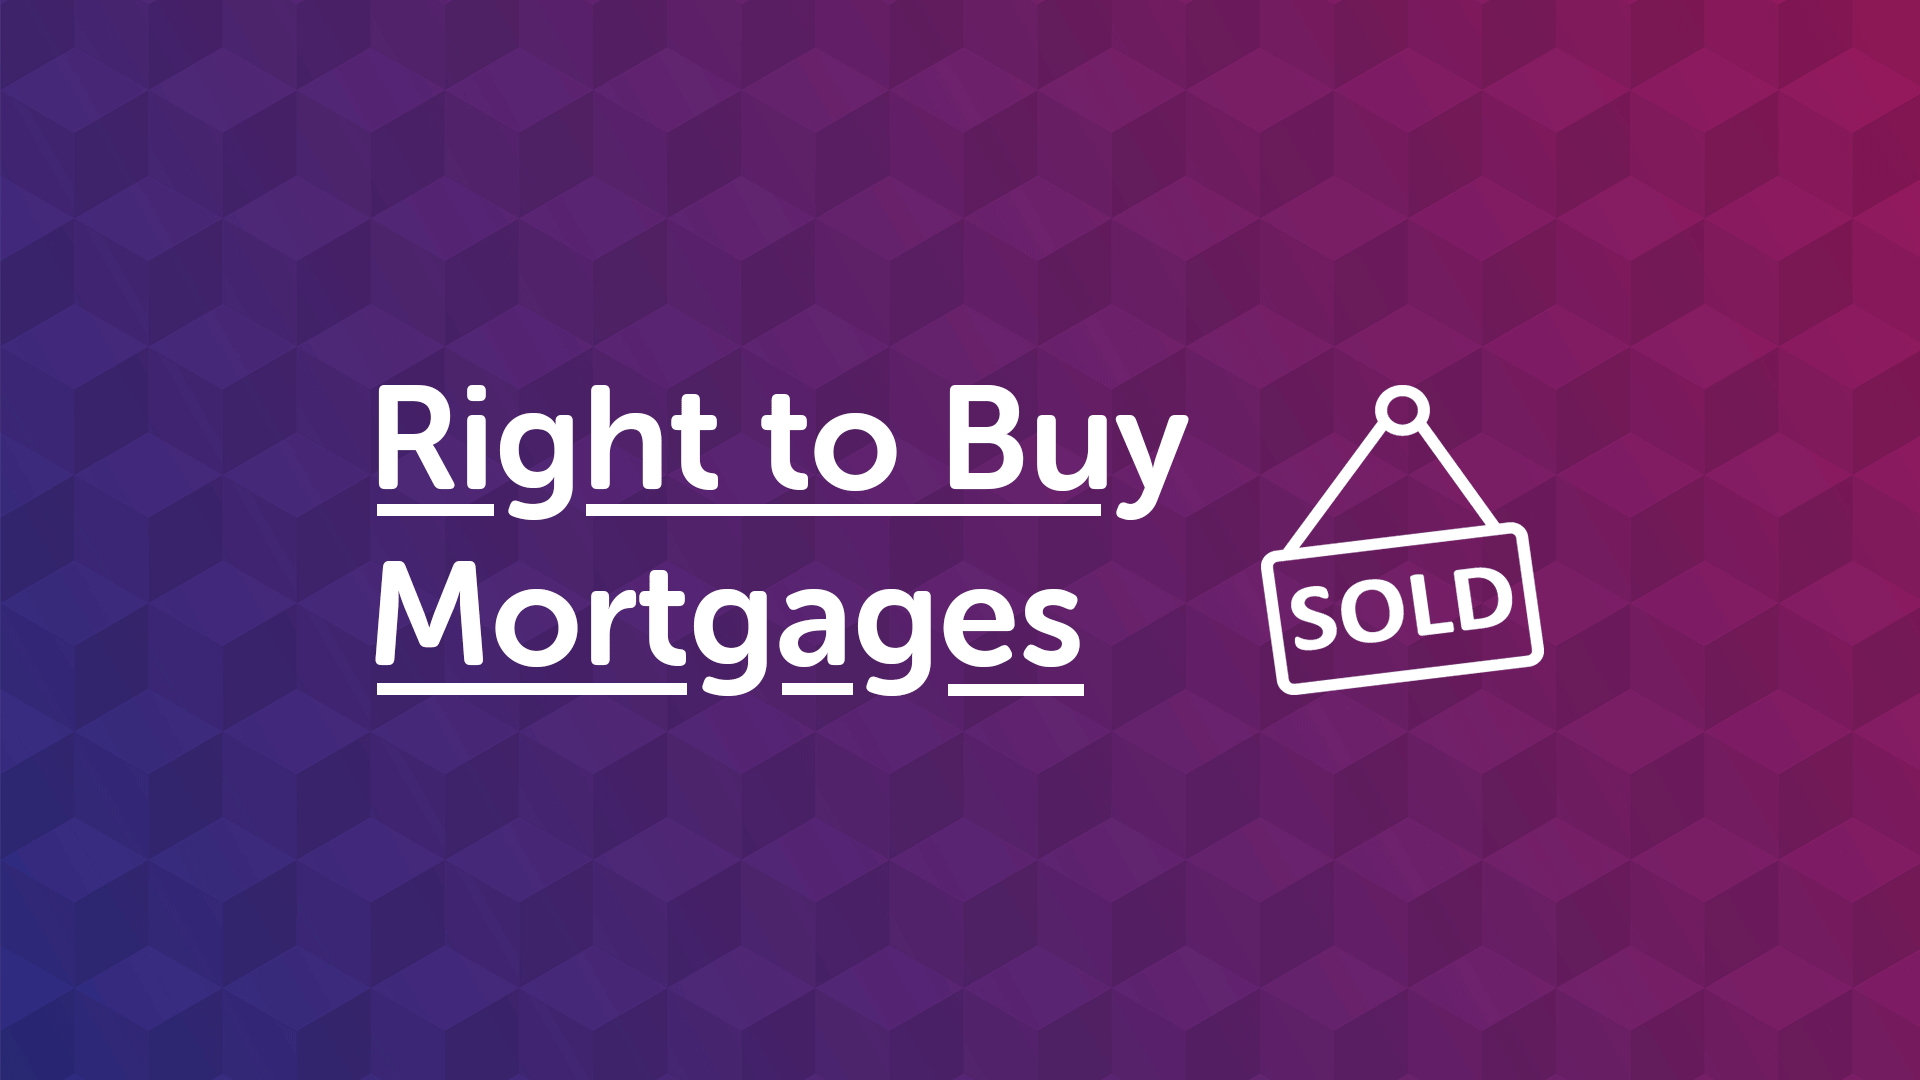 Right To Buy Scheme Mortgage Advice in Birmingham